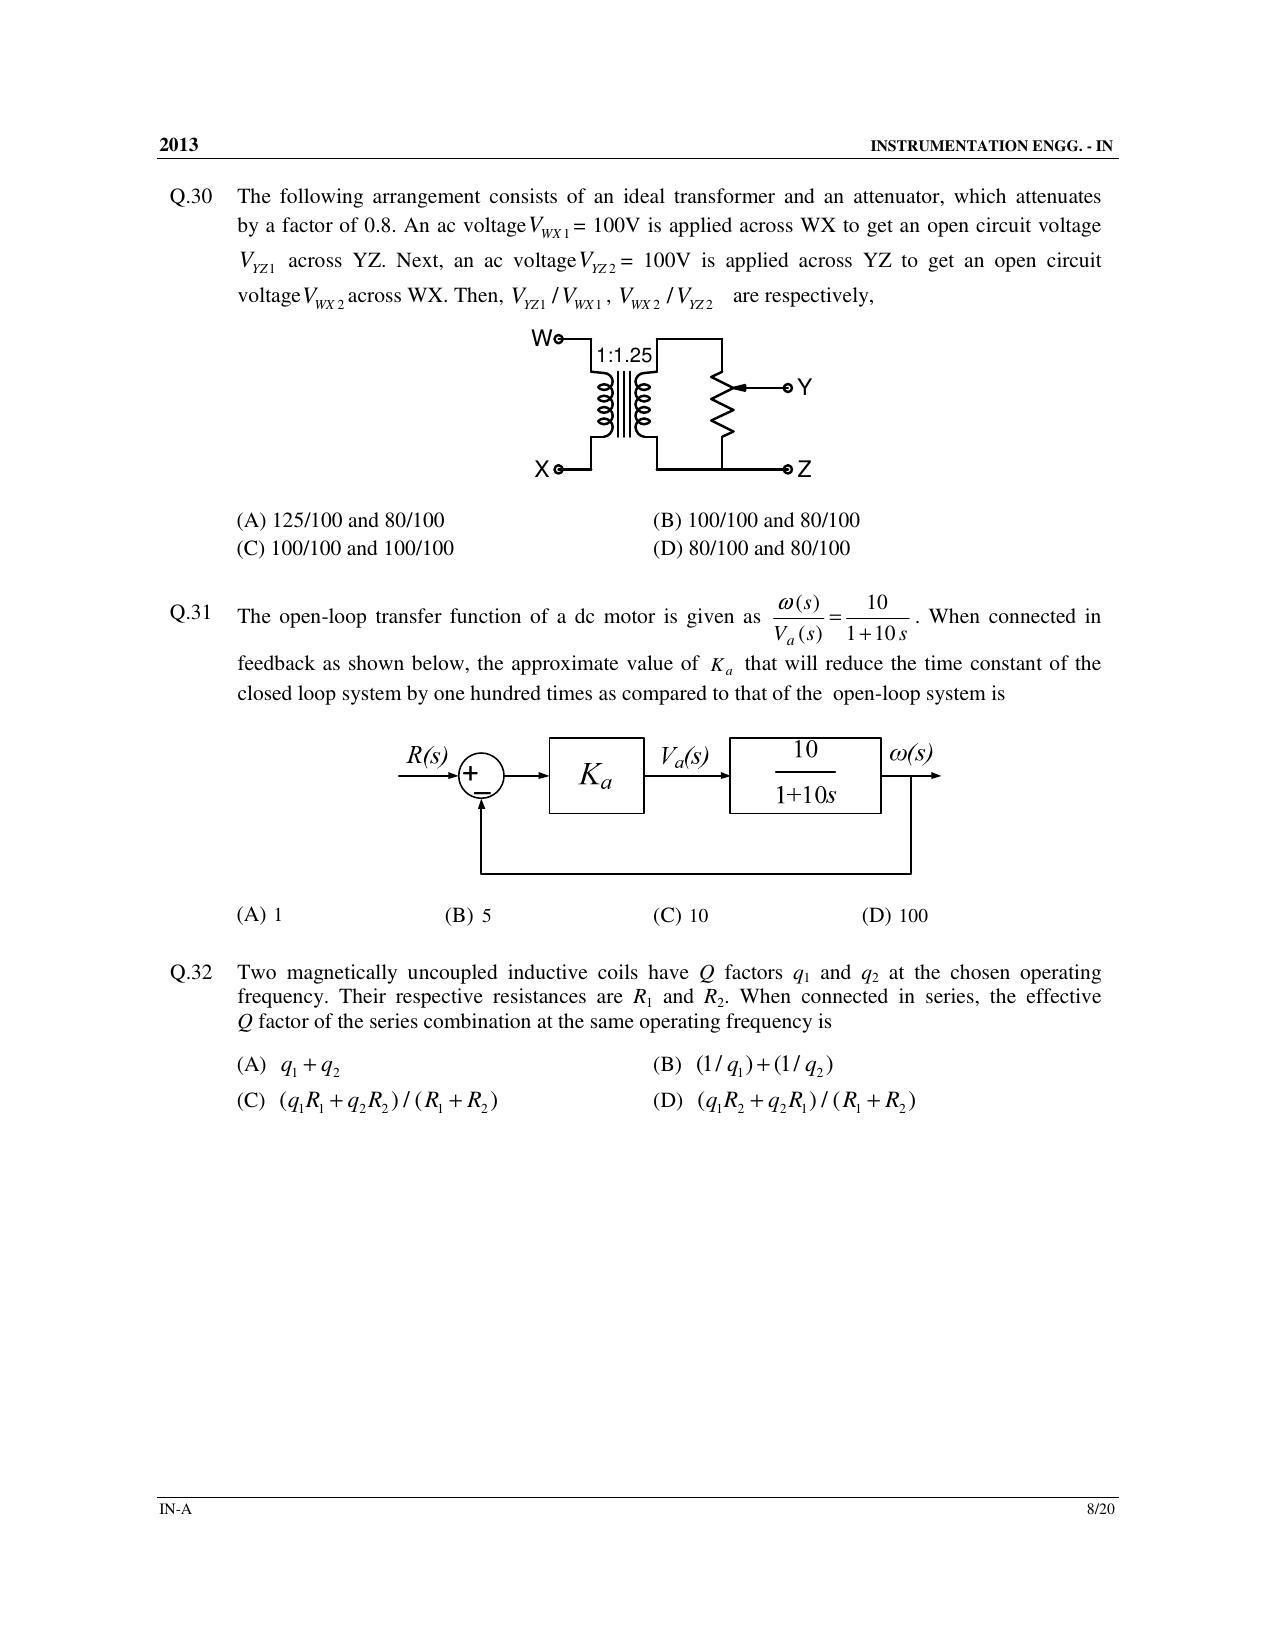 GATE 2013 Instrumentation Engineering (IN) Question Paper with Answer Key - Page 9